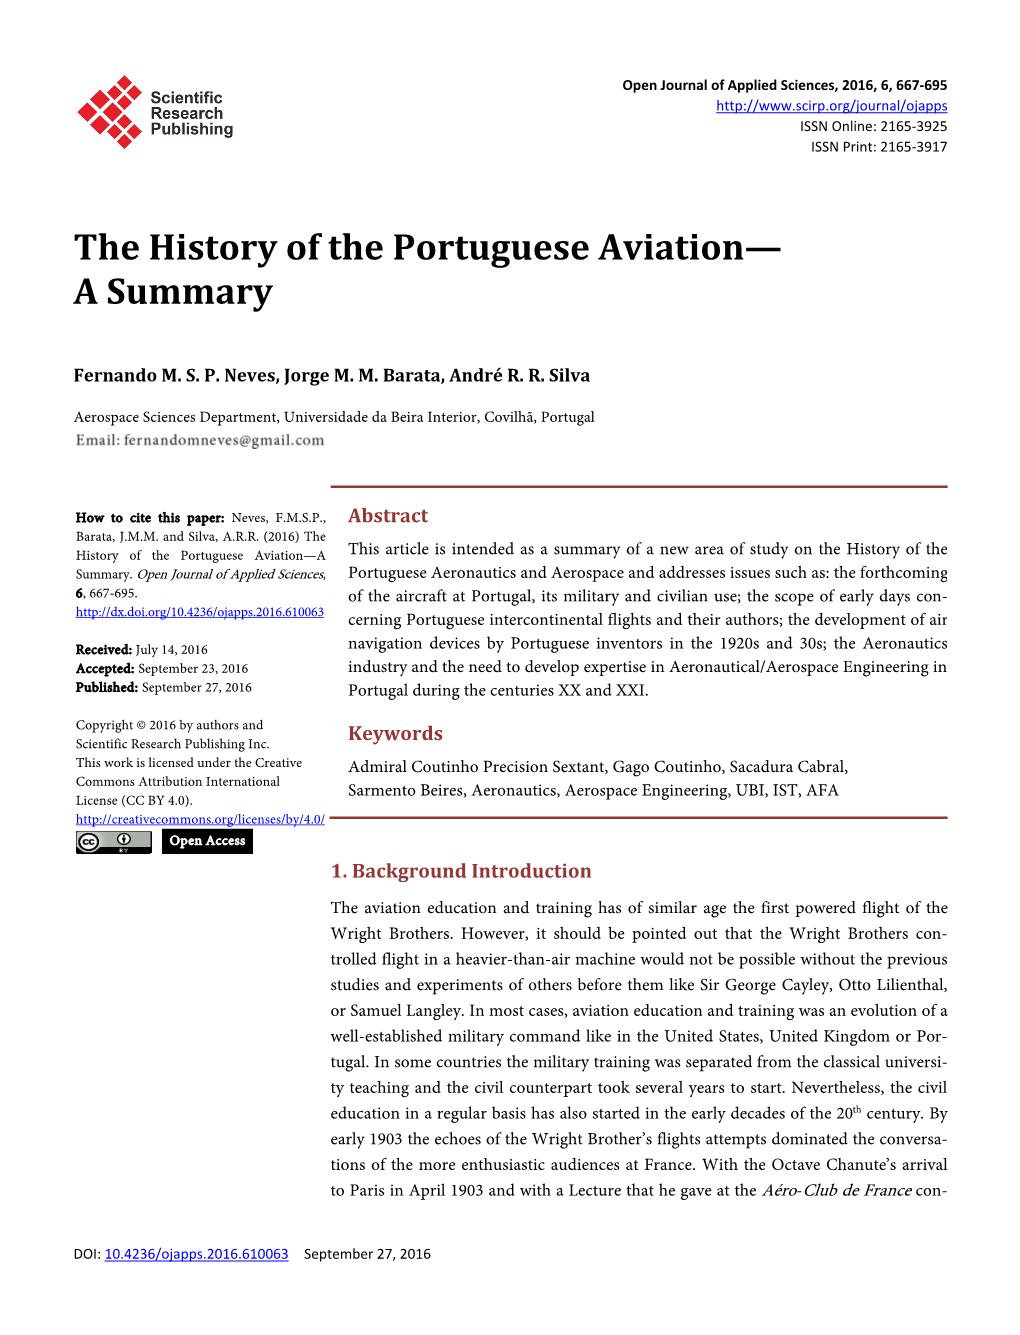 The History of the Portuguese Aviation—A Summary